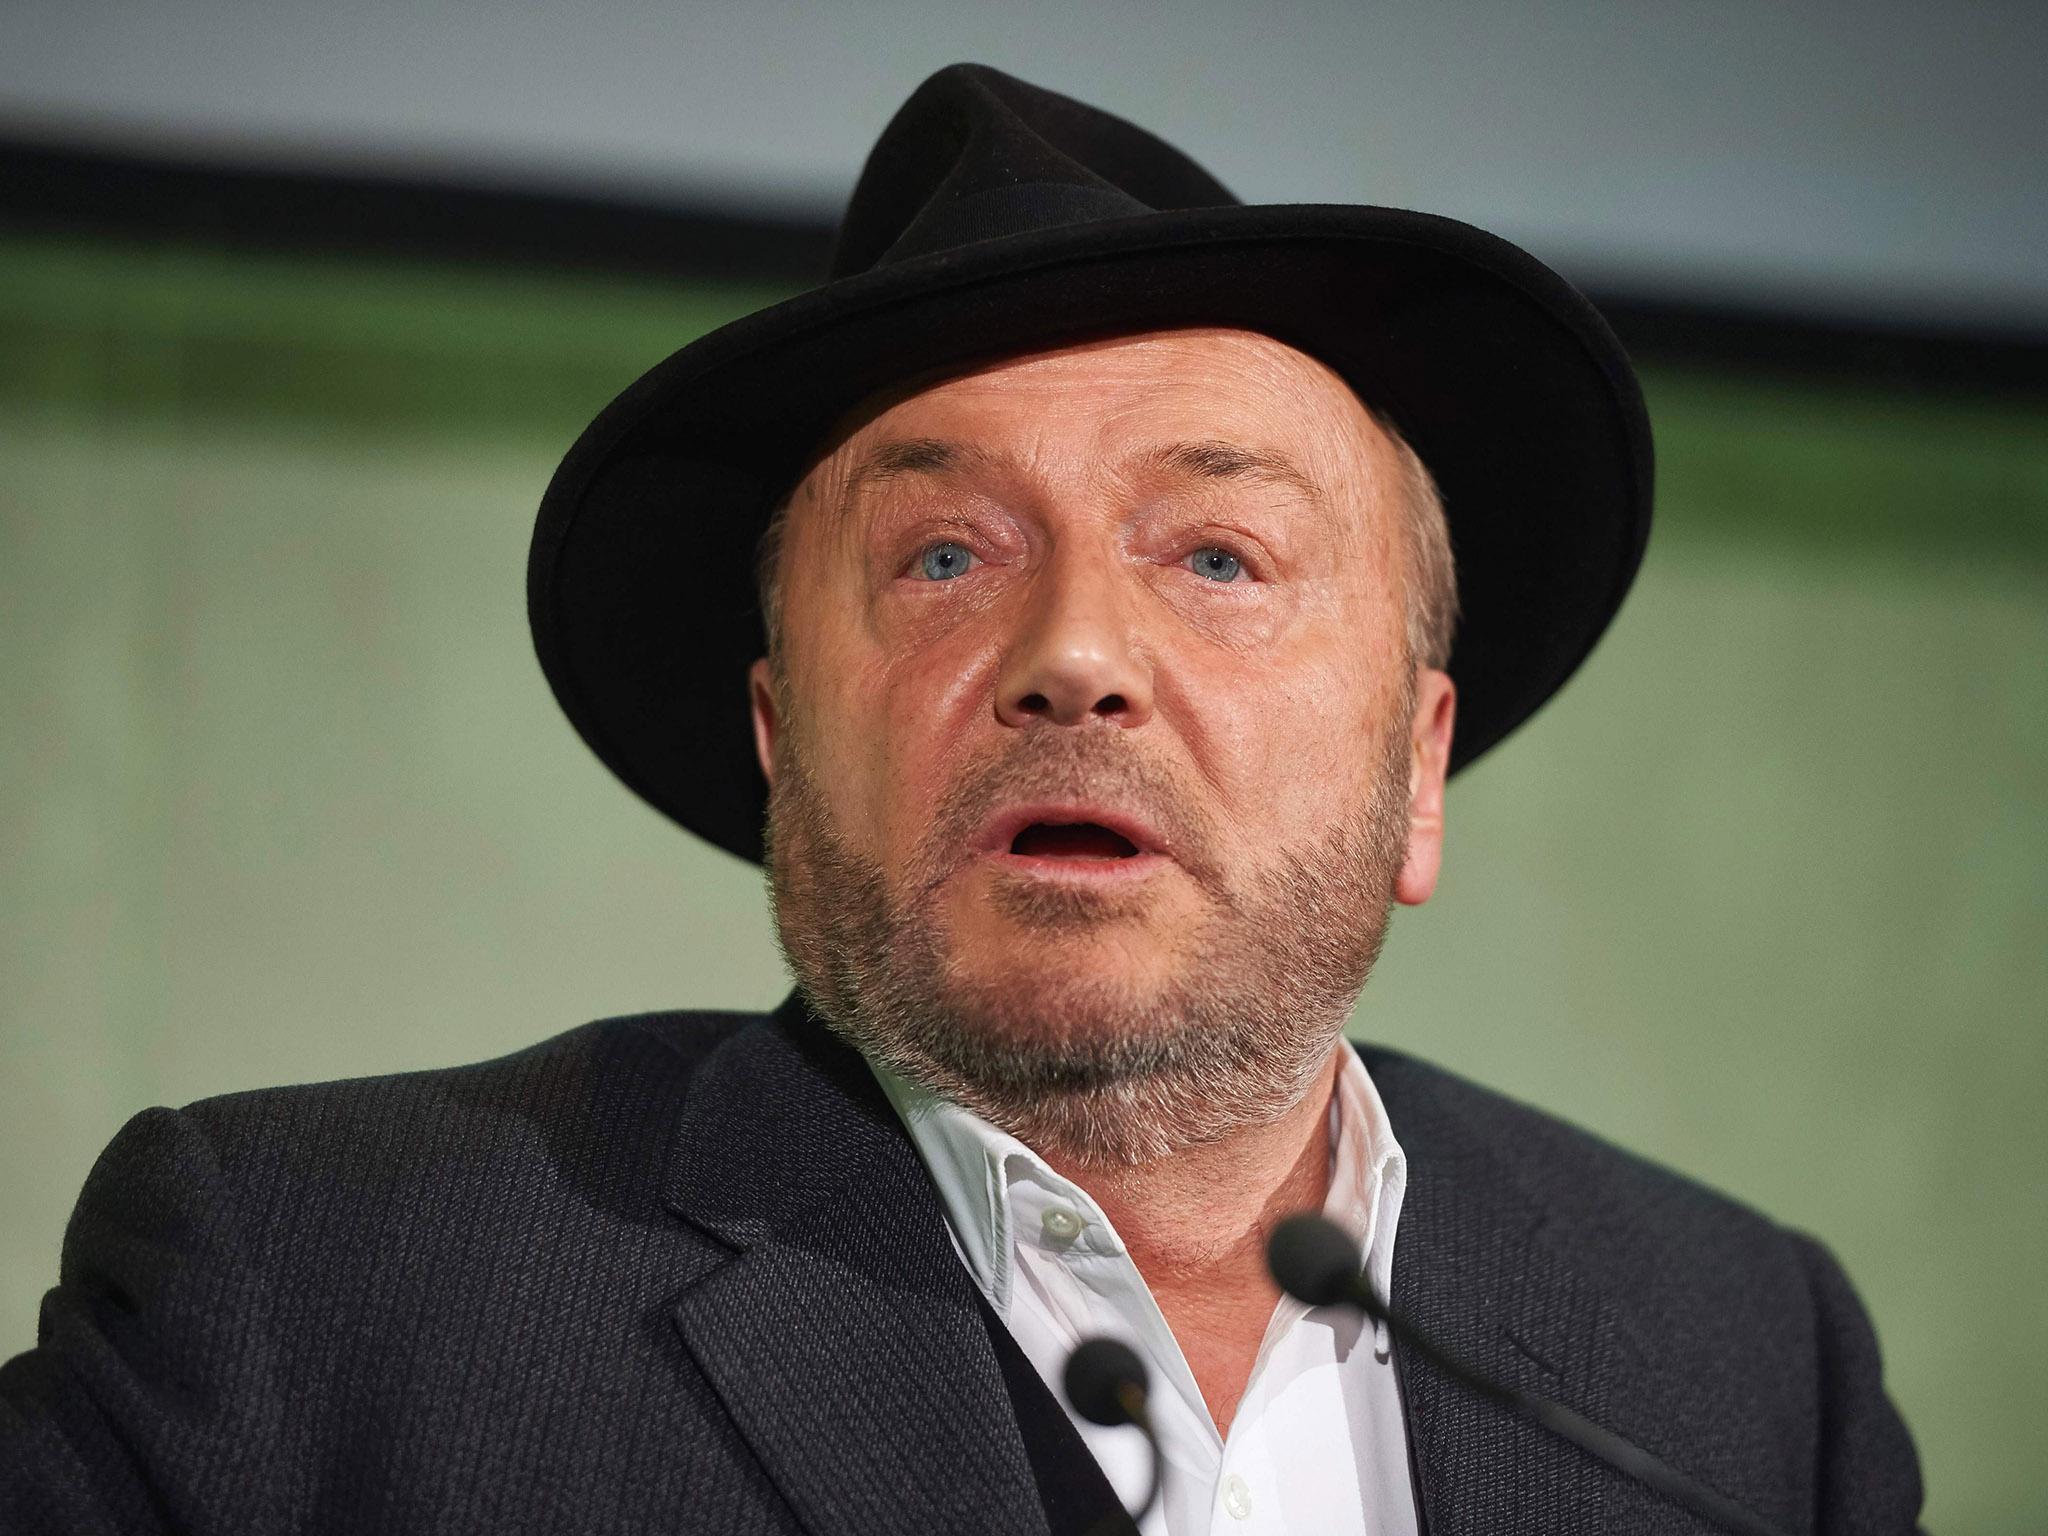 George Galloway is to stand for Parliament again in the Manchester Gorton by-election